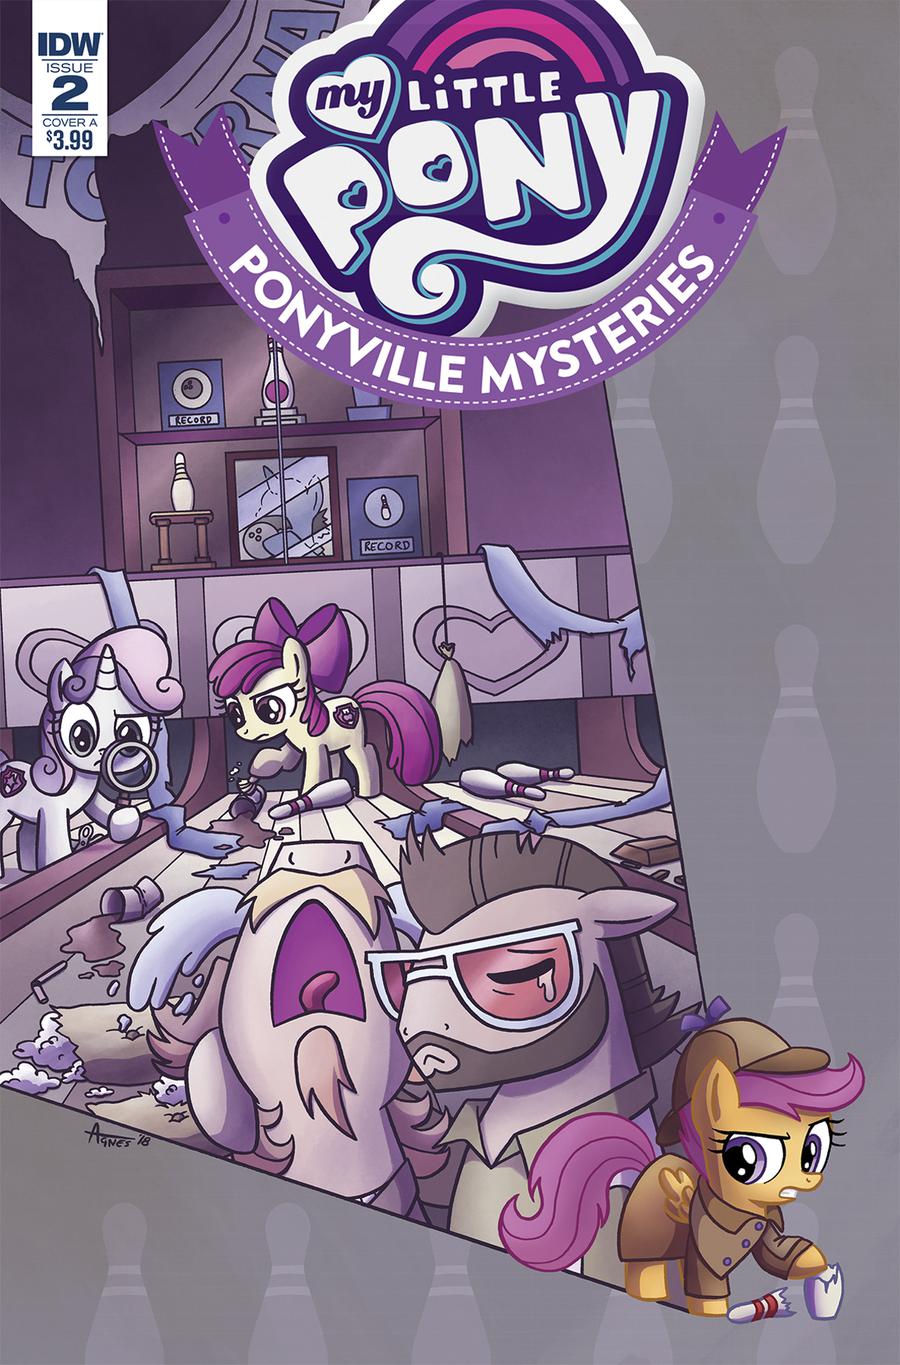 My Little Pony Ponyville Mysteries #2 Cover A Regular Agnes Garbowska Cover